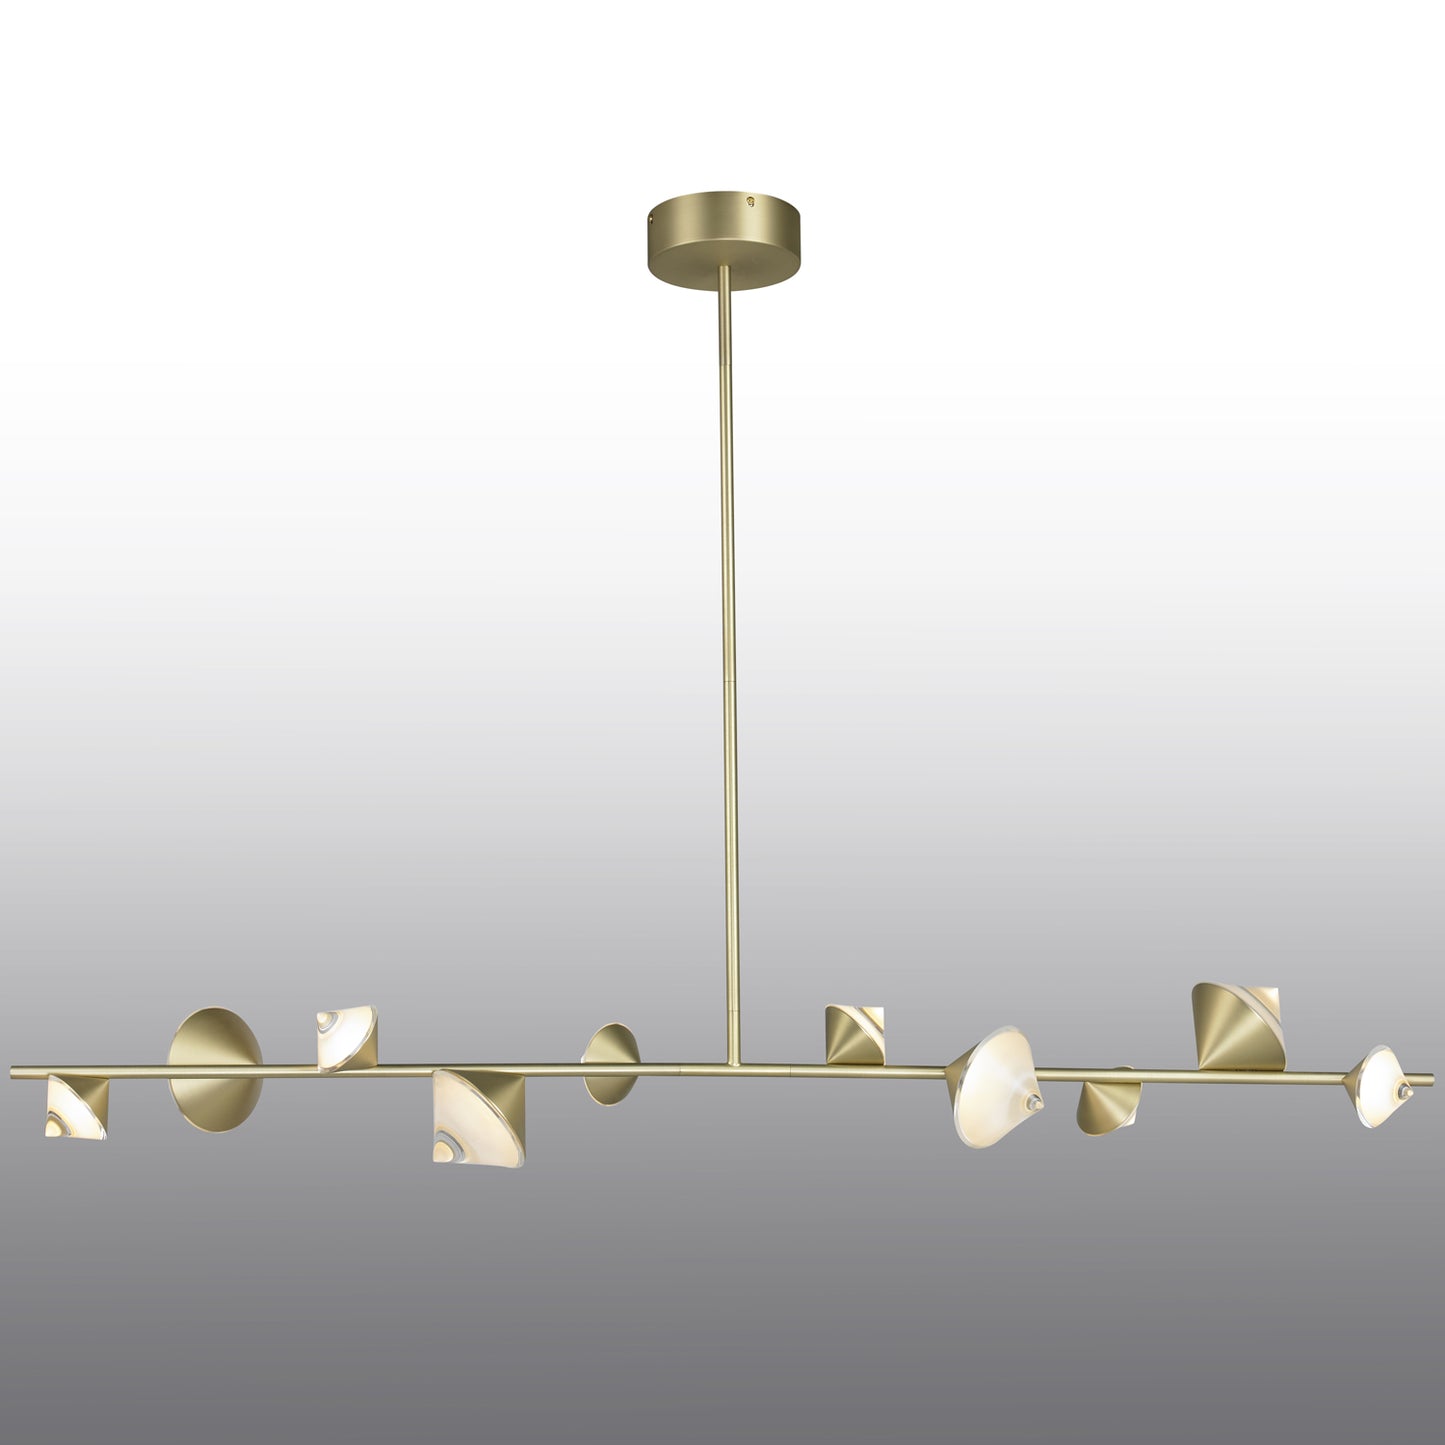 Table Pendant Light by Gloss (9113)